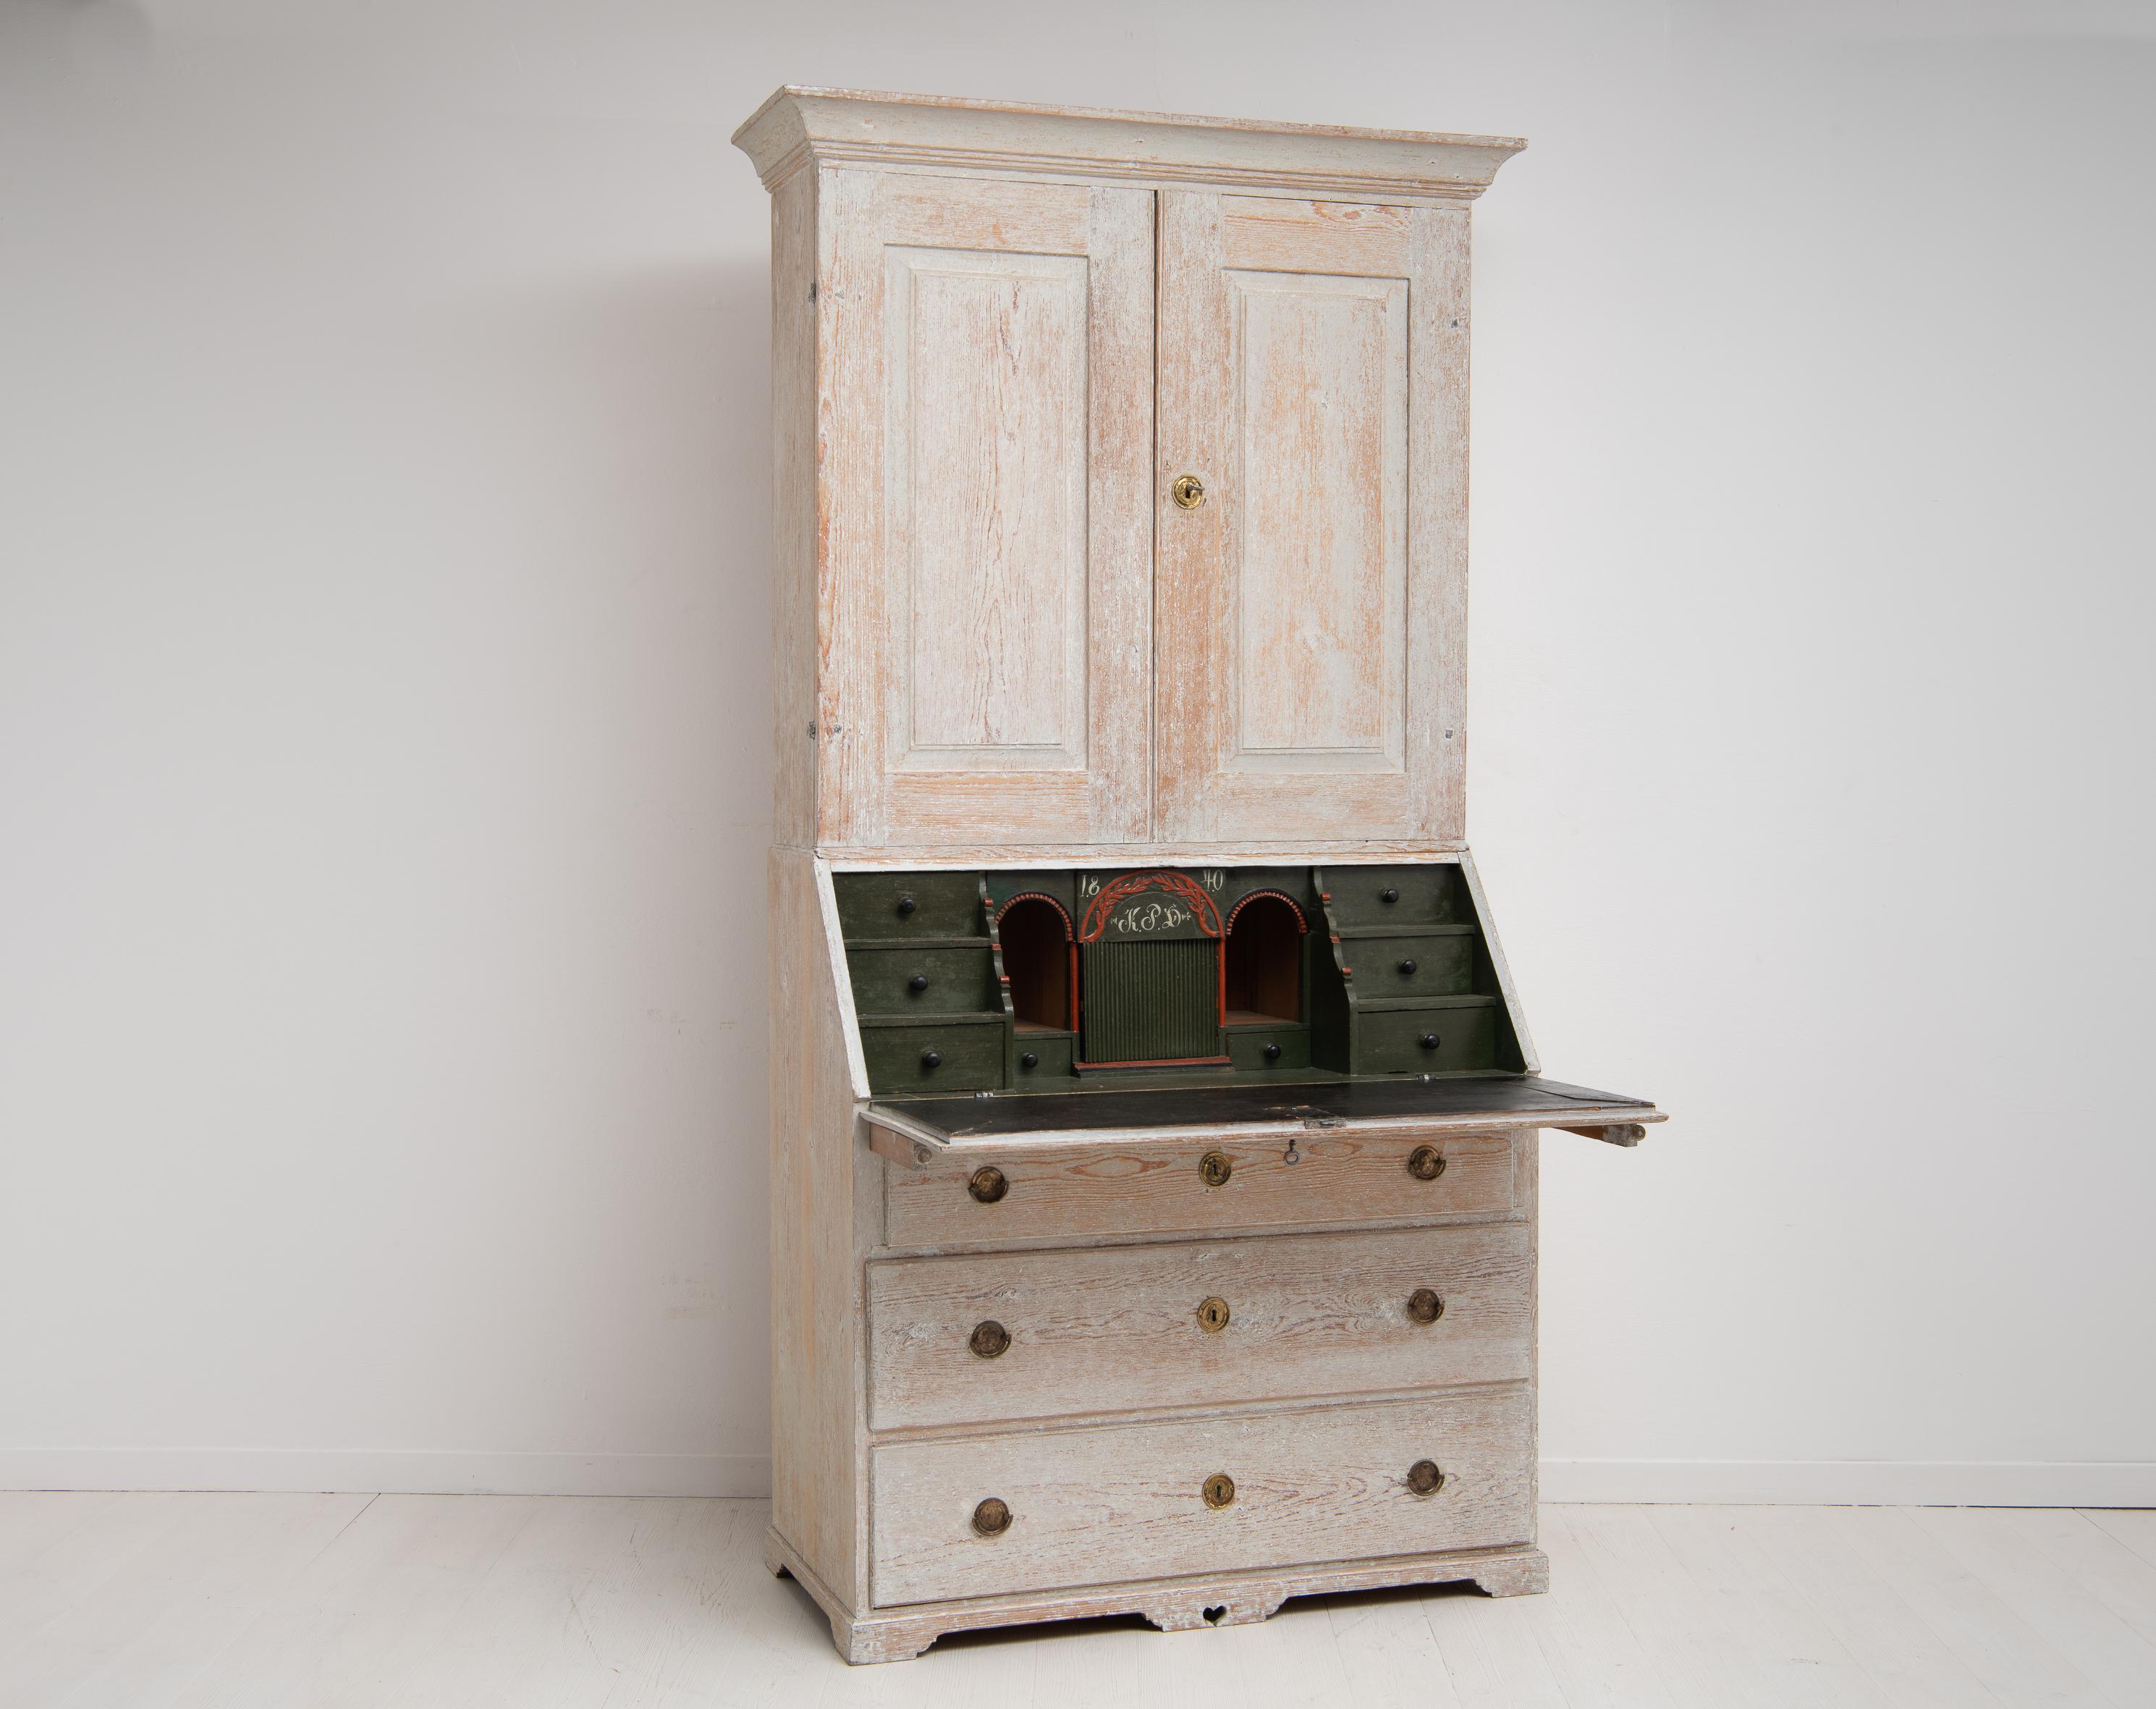 Swedish Gustavian bureau cabinet made in pine from the 1800s. This country cabinet is from northern Sweden and made in two parts. The upper cabinet has doors with interior shelves and the lower cabinet has a writing desk and drawers. The interior